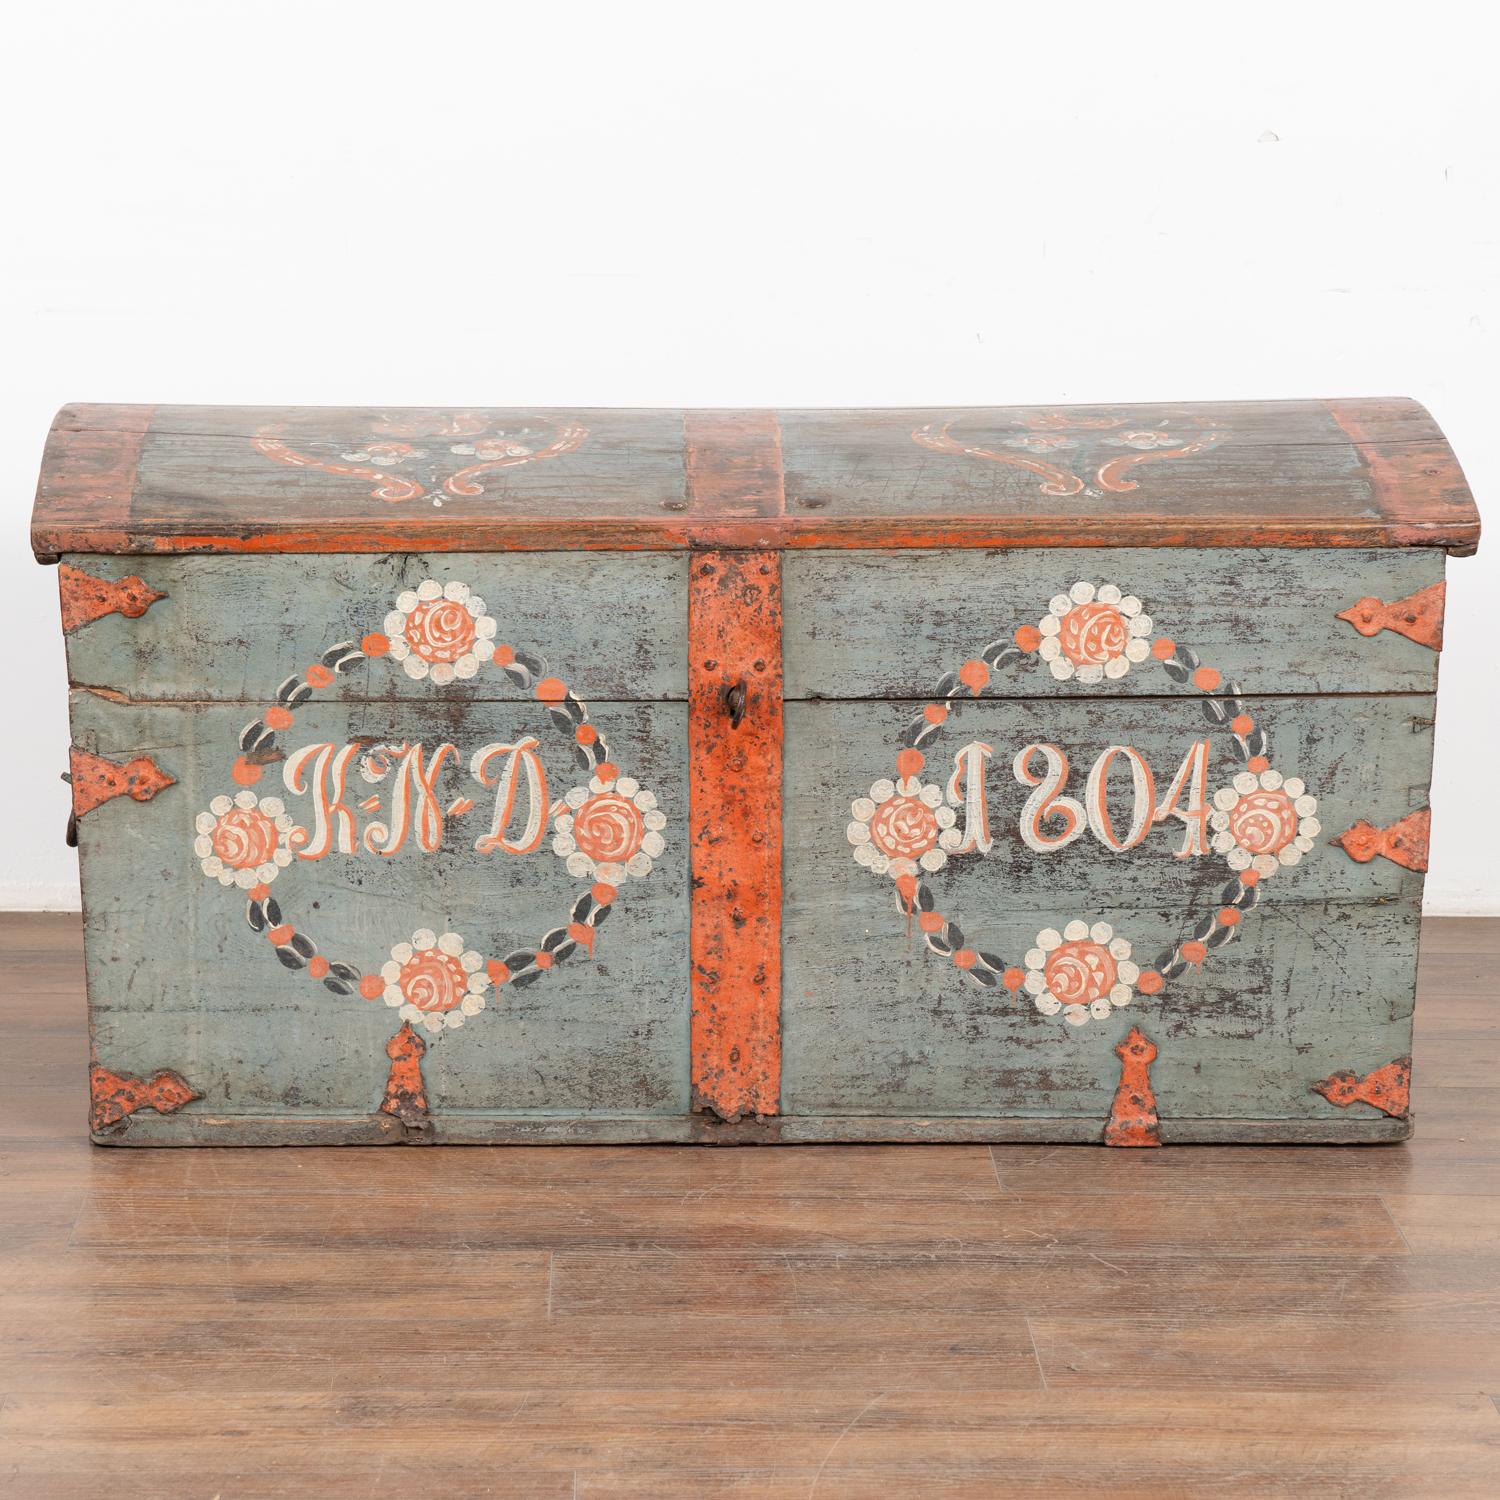 Original Blue Painted Dome Top Trunk from Sweden dated 1804 In Good Condition For Sale In Round Top, TX